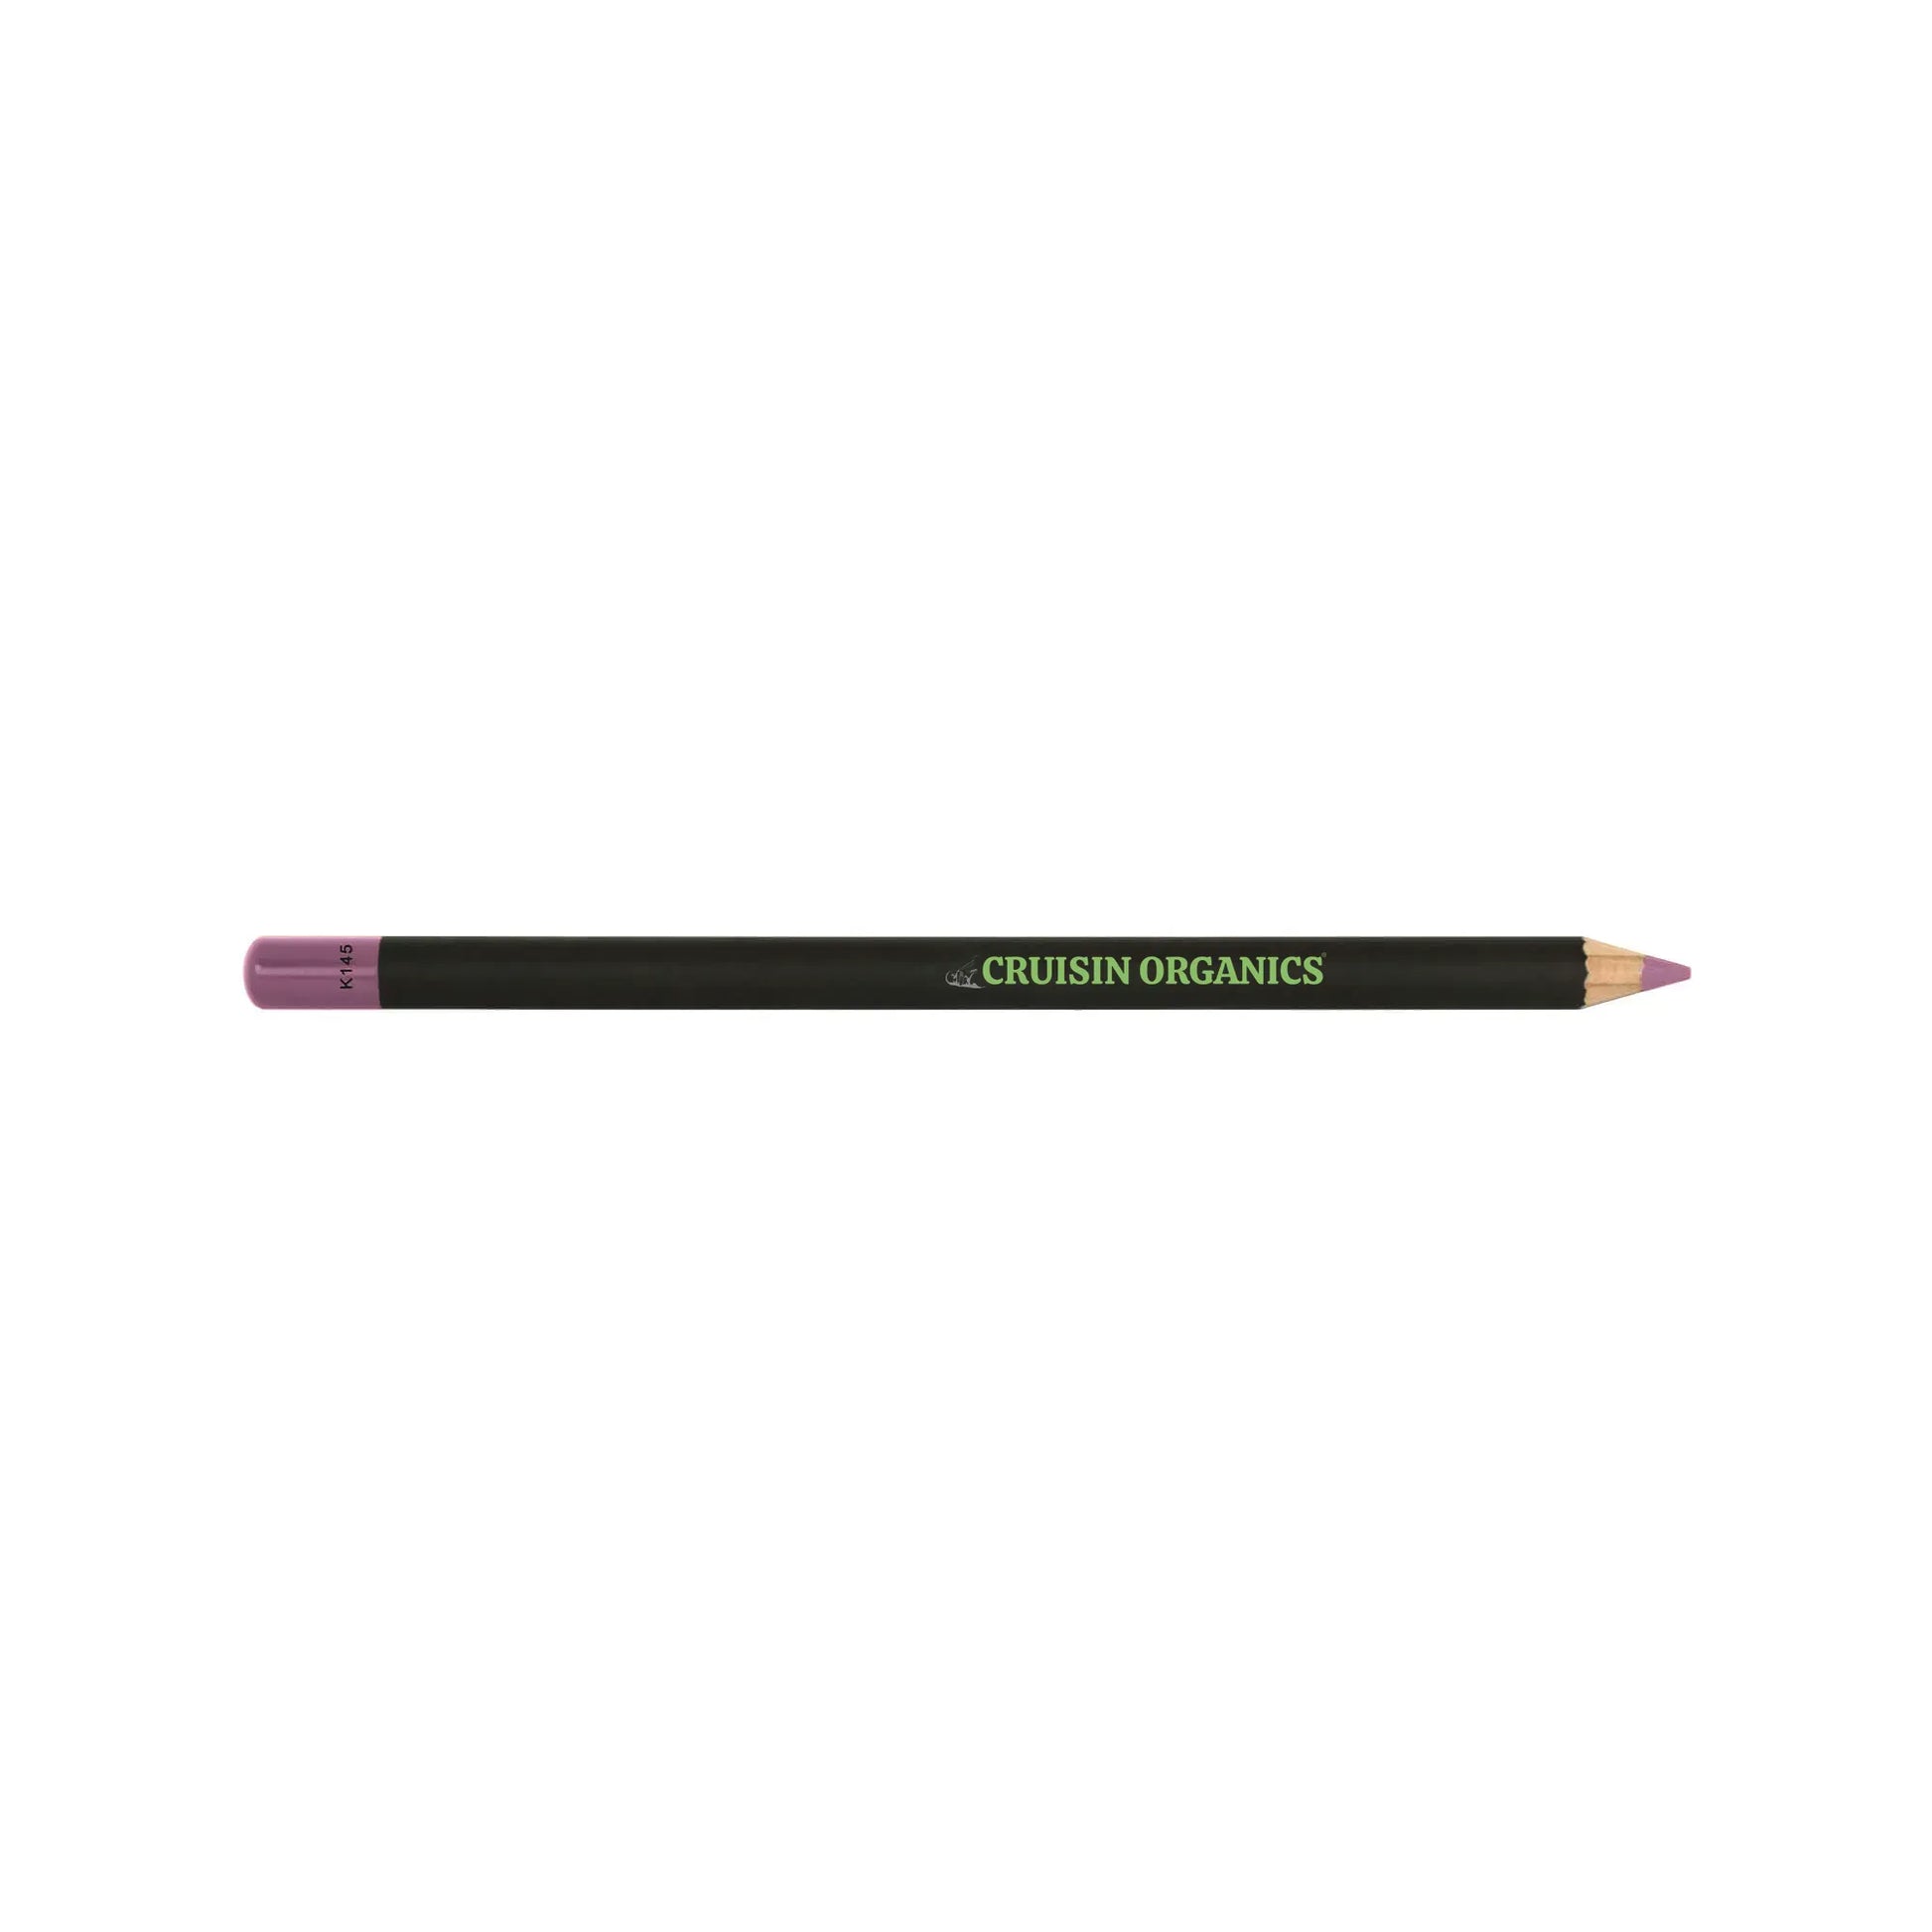 Cruisin Organics Berry Nude Lip Pencil to make your face looking beautiful. Outline lips to showcase shape with a lip pencil in natural or a toning shade to your chosen lip color.